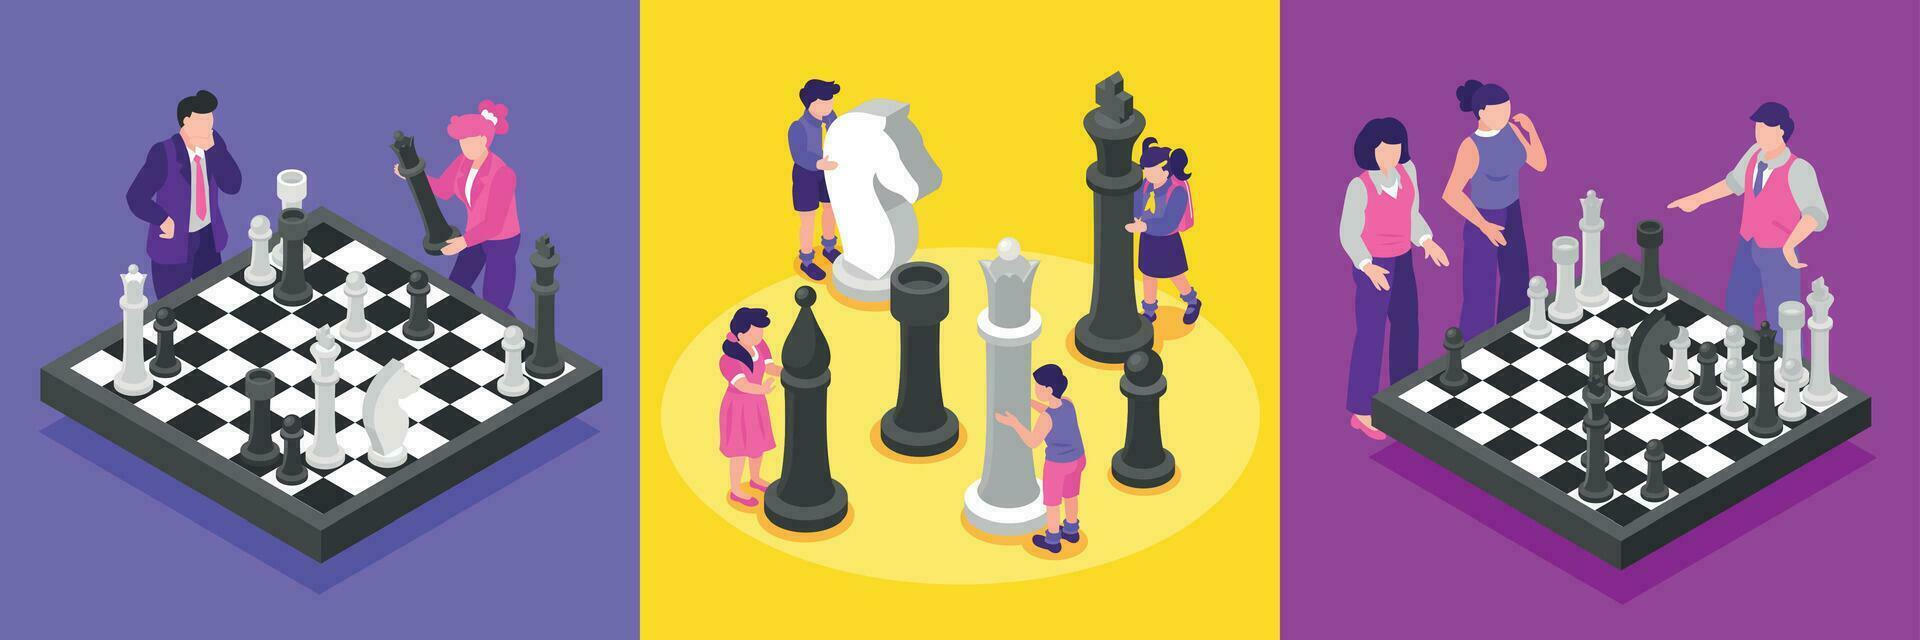 Isometric Chess Compositions Set vector